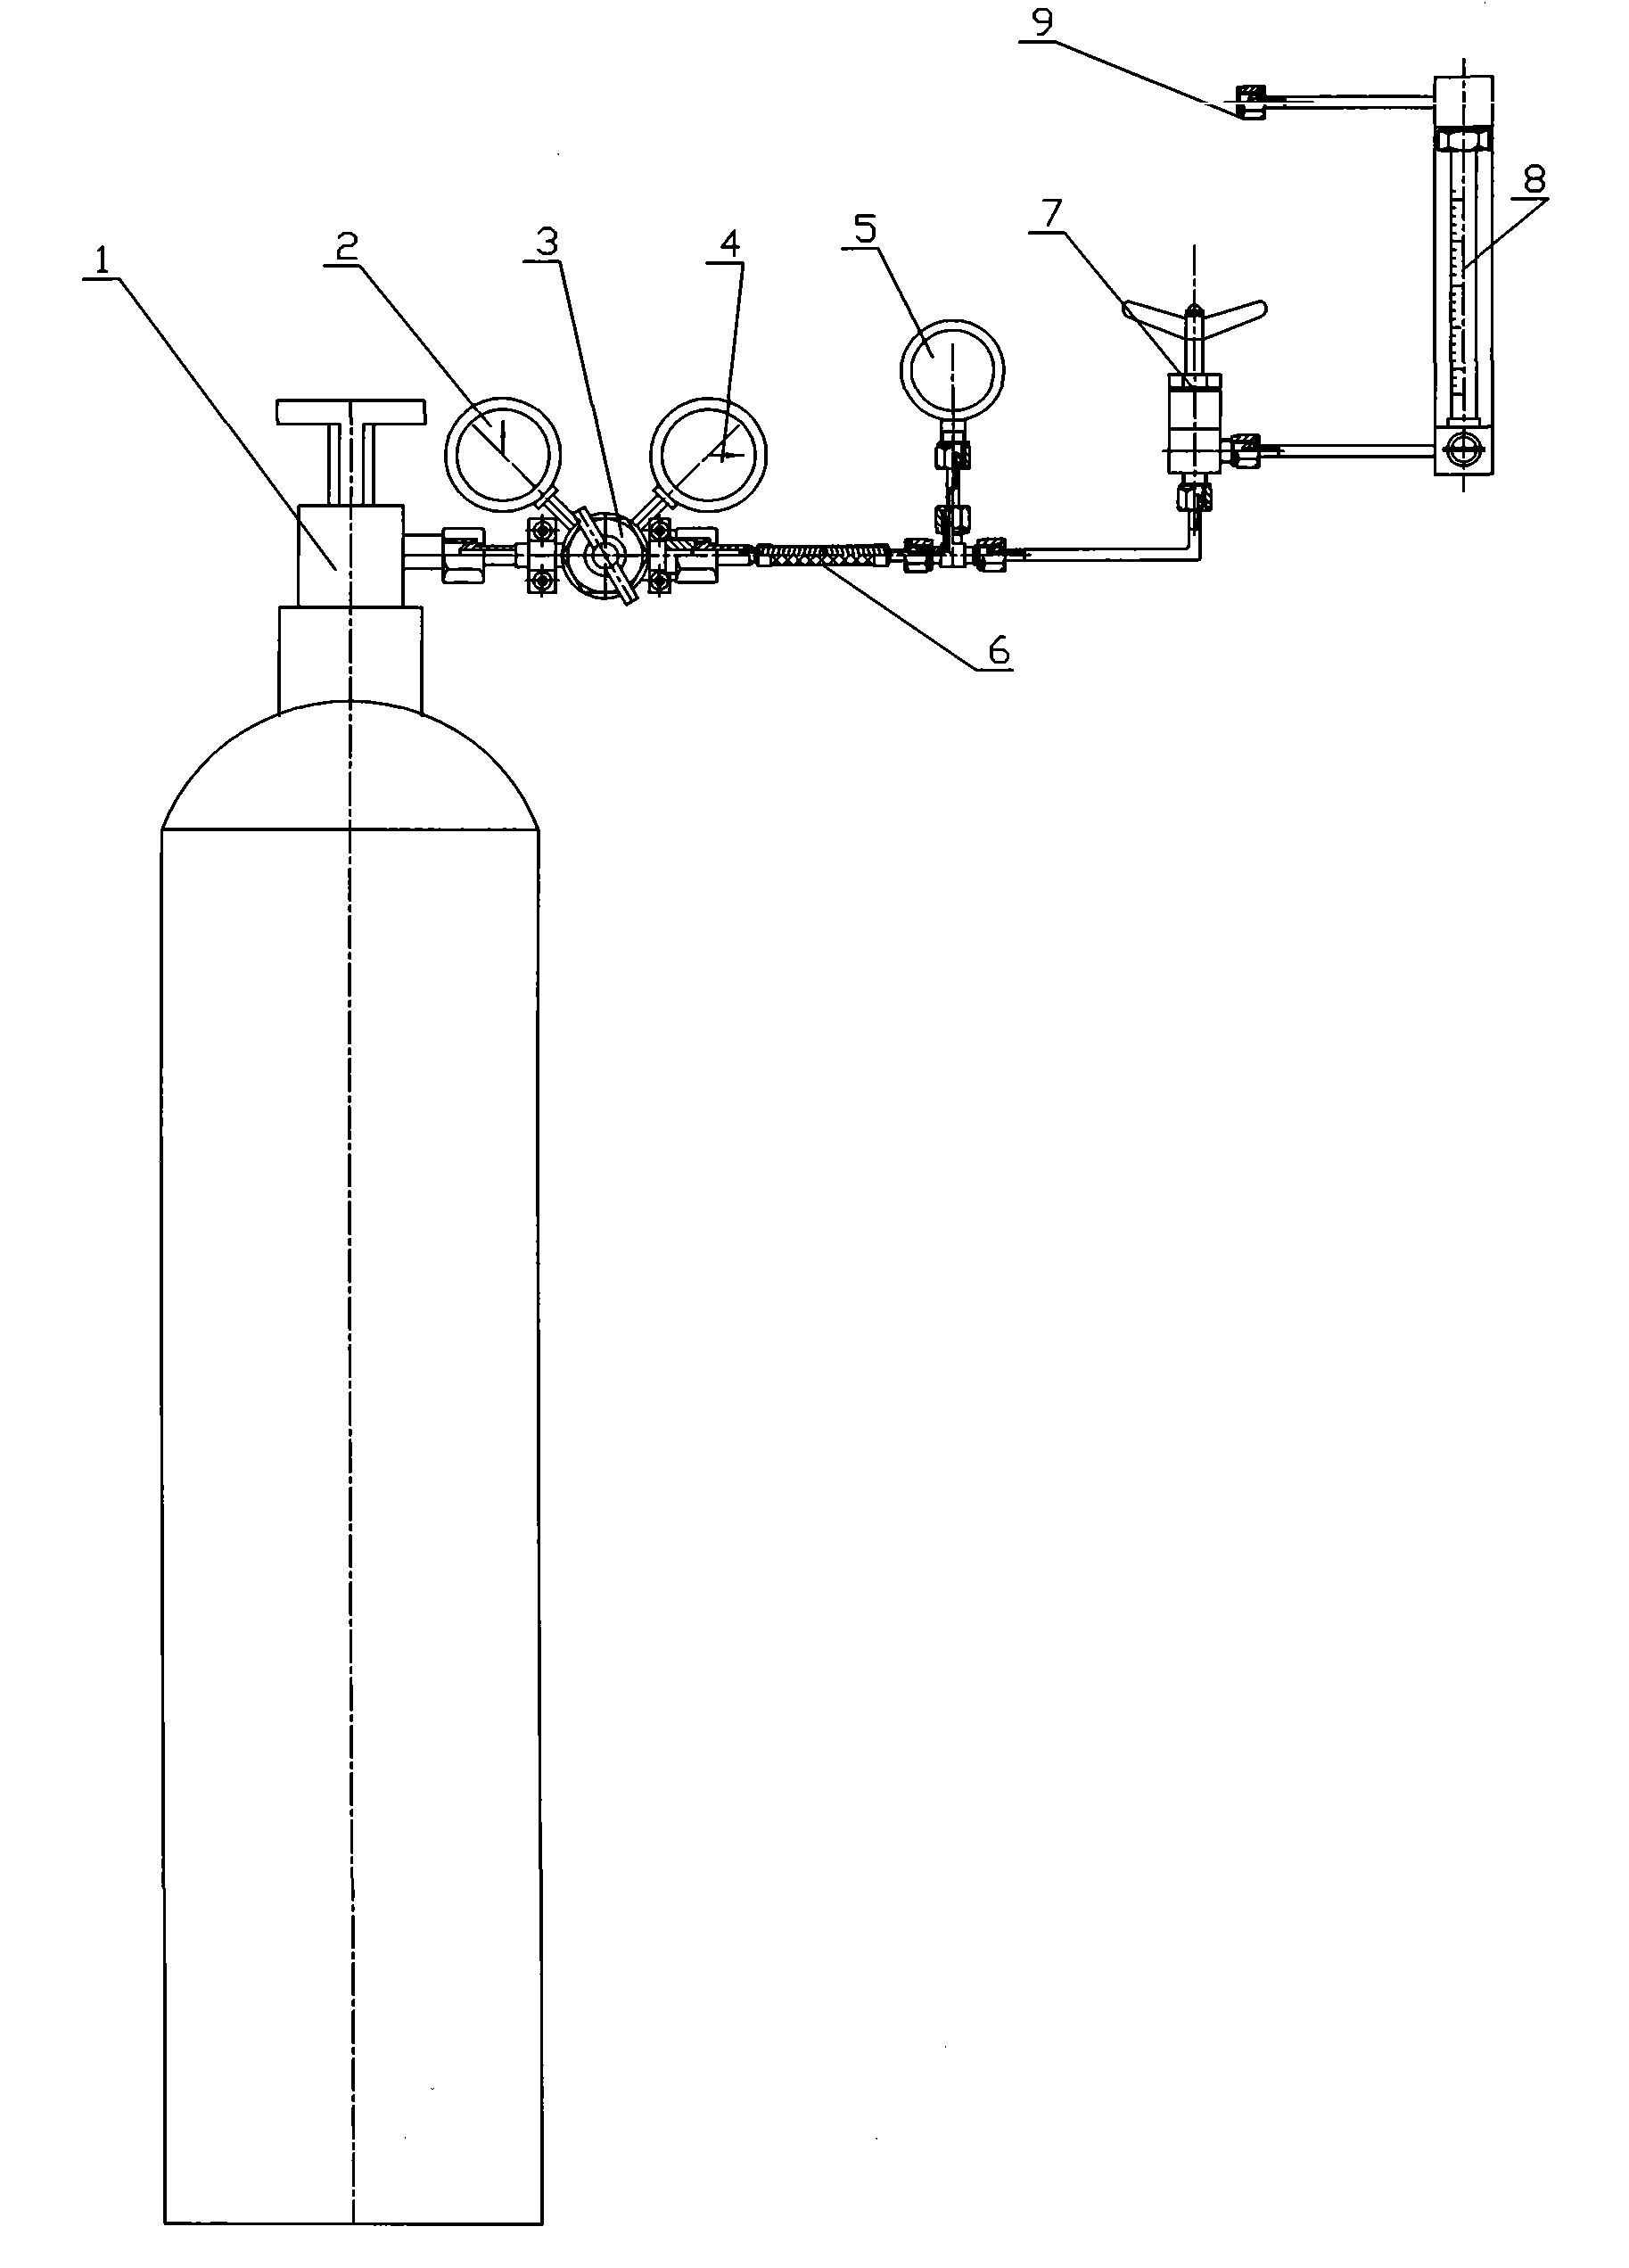 An oxygen supply apparatus for underground shelter